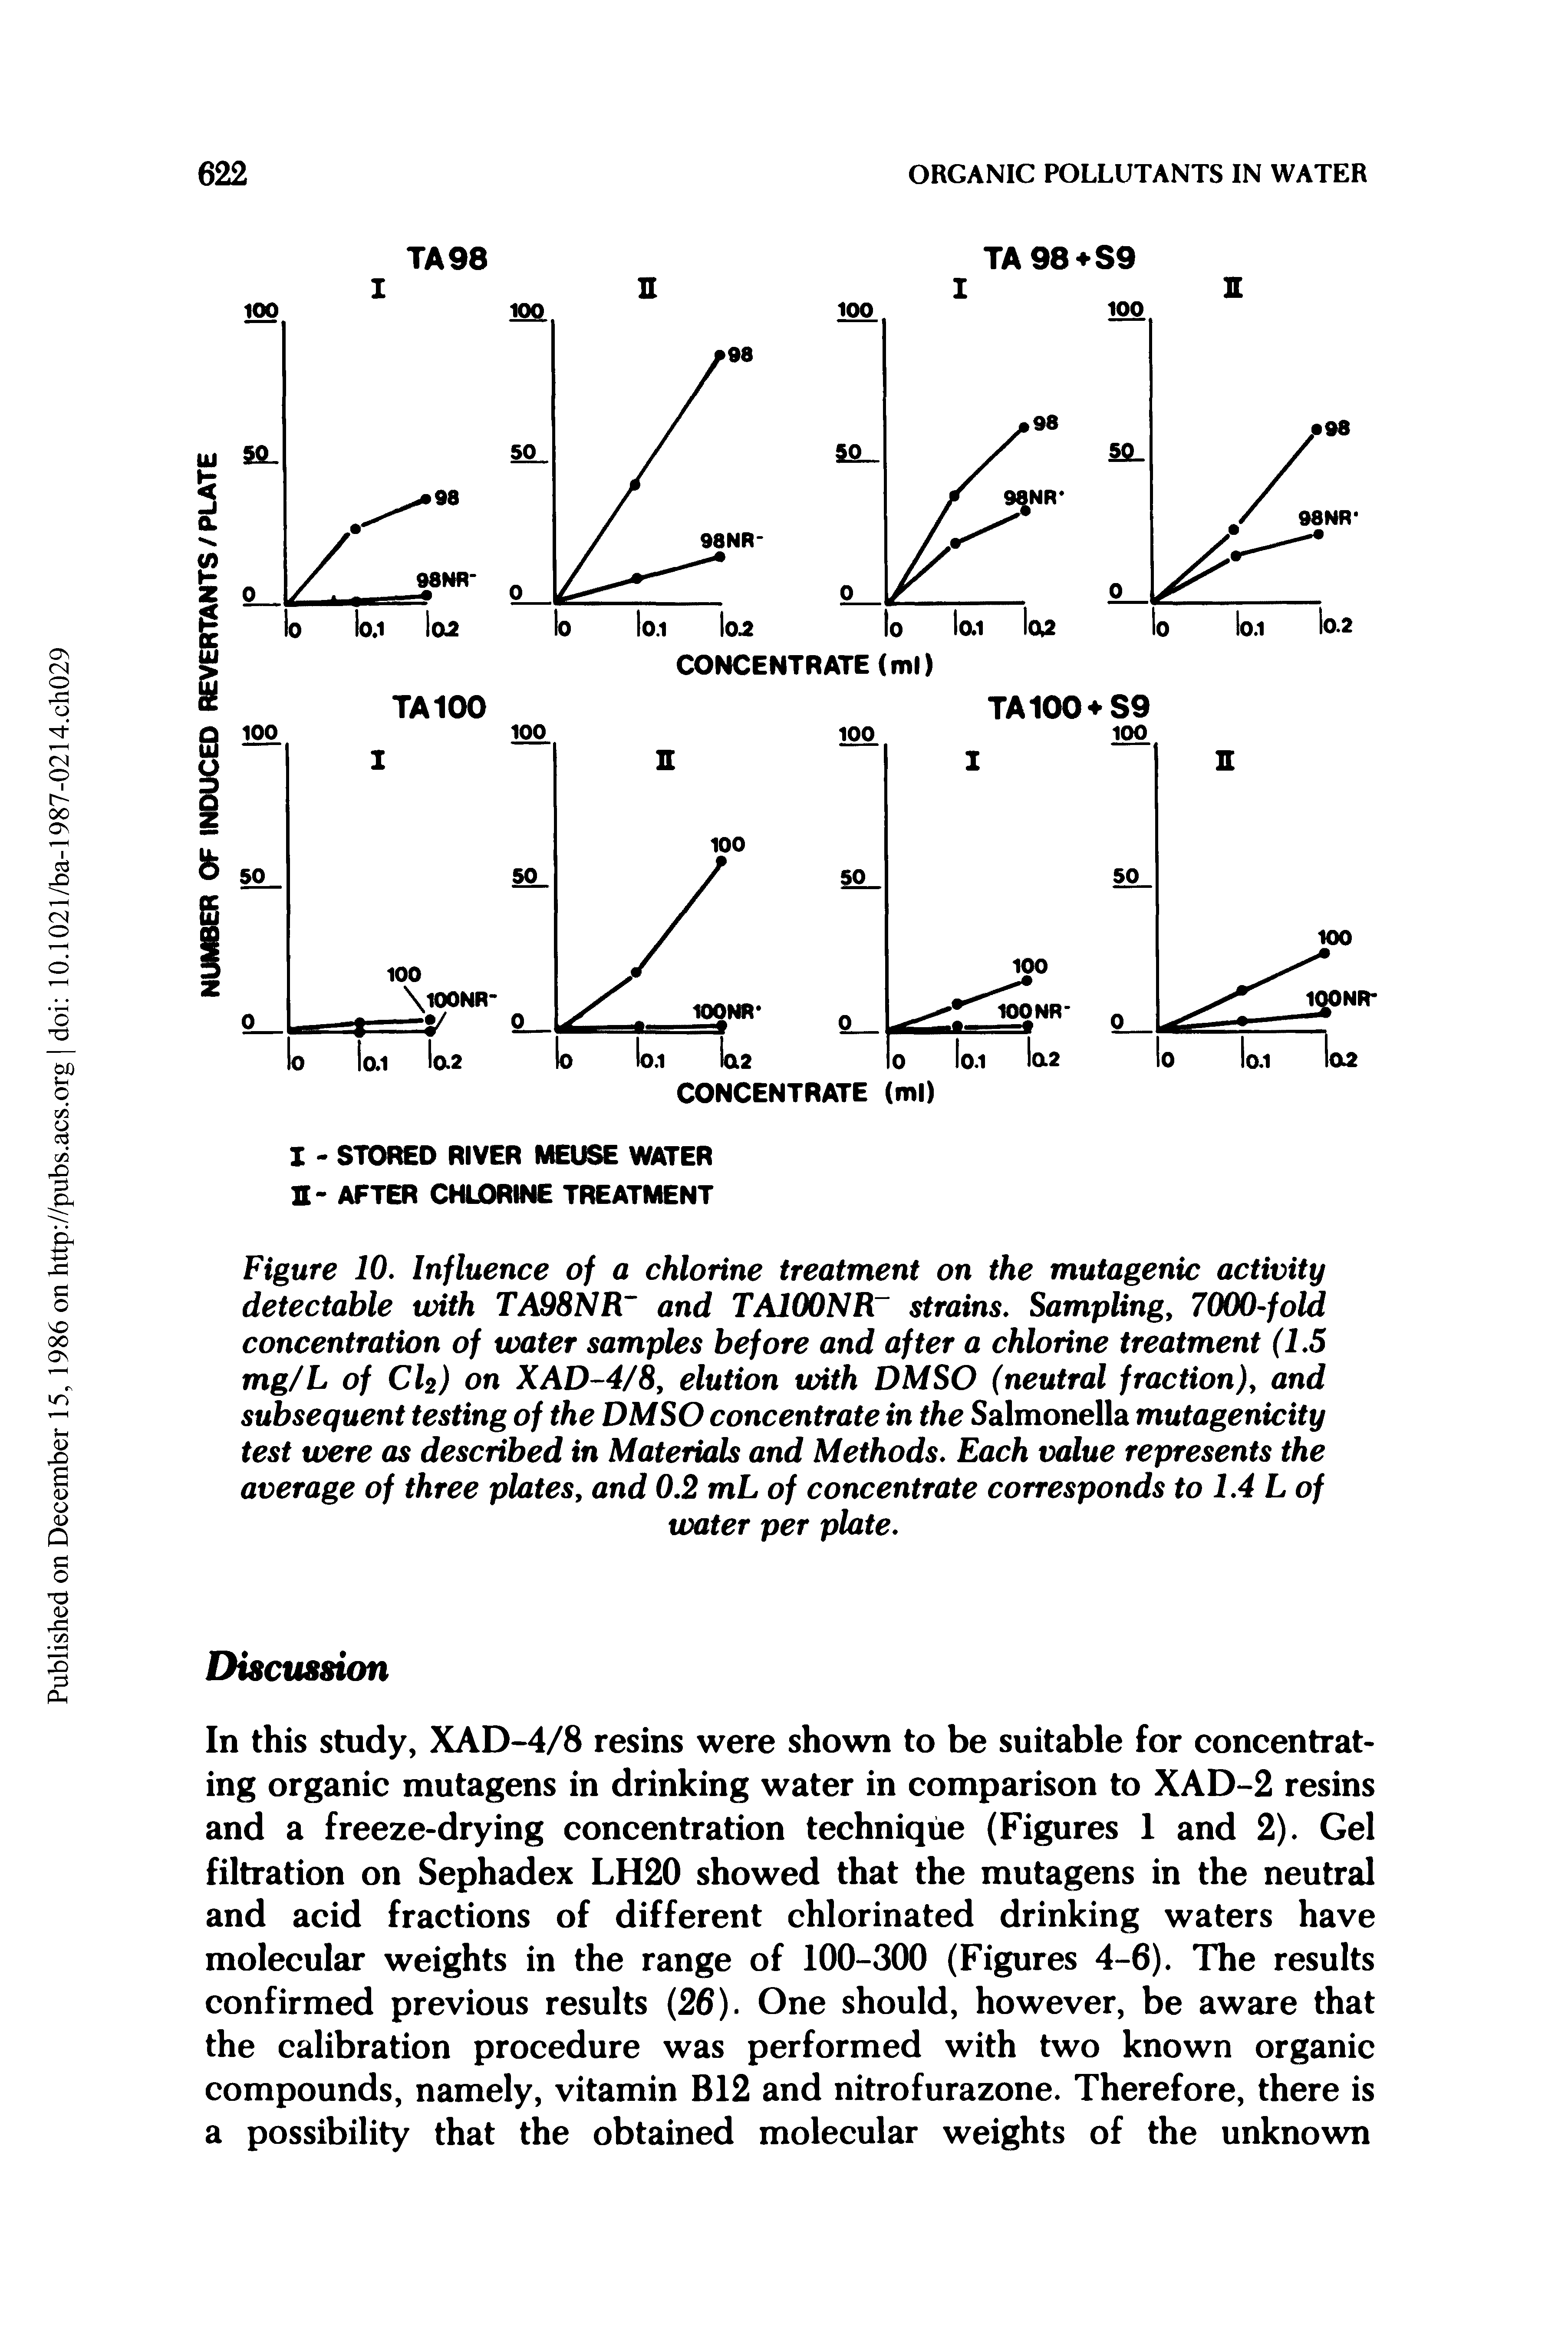 Figure 10. Influence of a chlorine treatment on the mutagenic activity detectable with TA98NR and TA100NR strains. Sampling, 7000-fold concentration of water samples before and after a chlorine treatment (1.5 mg/L of Ch) on XAD-4/8, elution with DMSO (neutral fraction)> and subsequent testing of the DMSO concentrate in the Salmonella mutagenicity test were as described in Materials and Methods. Each value represents the average of three plates, and 0.2 mL of concentrate corresponds to 1.4 L of...